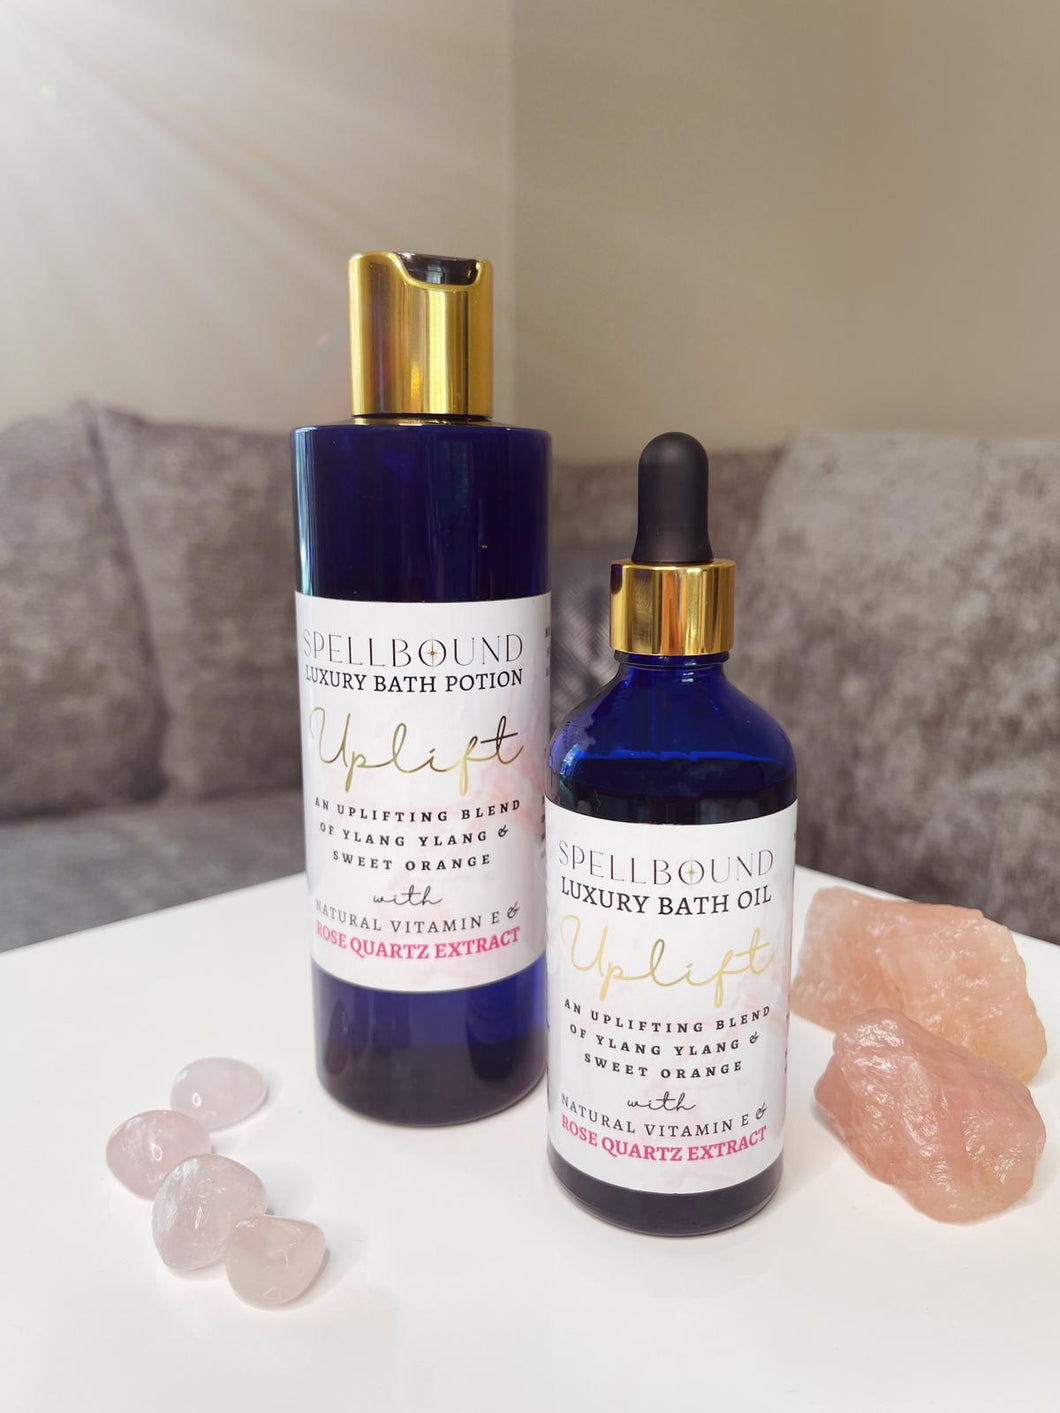 Uplift Duo of Bath Potion and Bath Oil